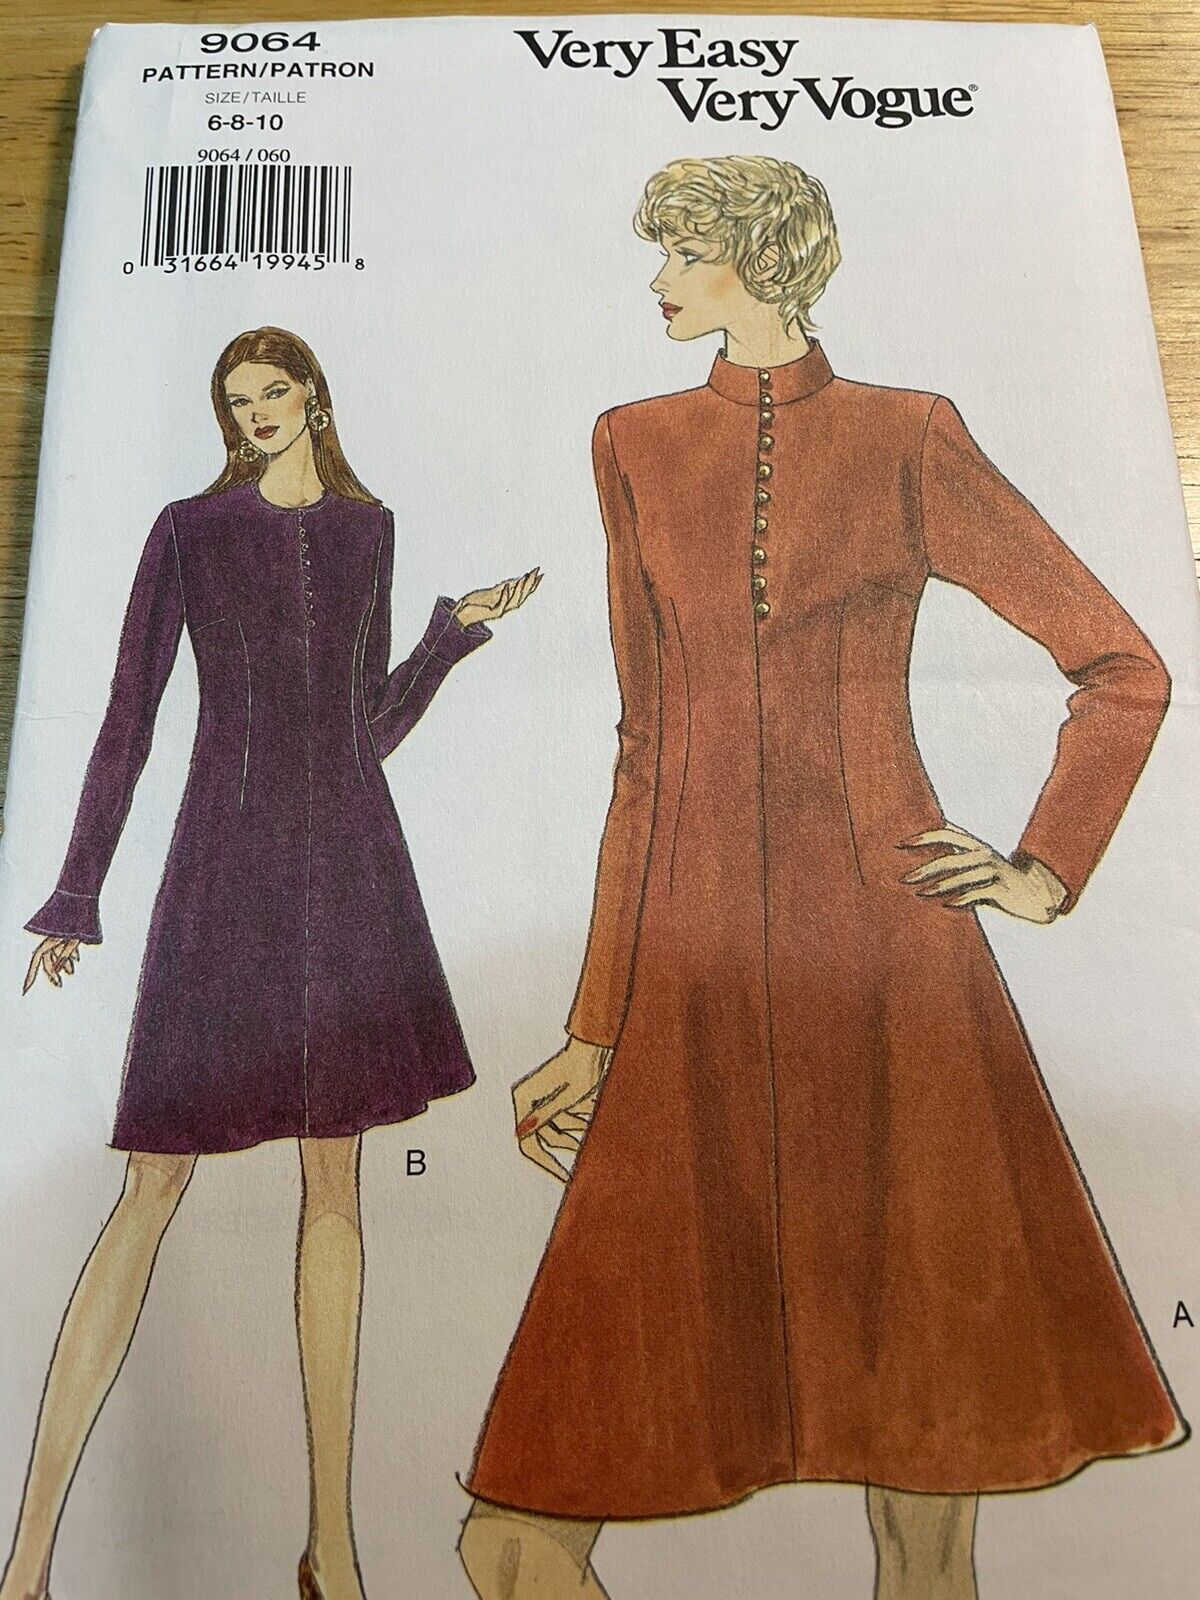 Very Easy Very Vogue 9064 Uncut Sewing Pattern Sizes 6-8-10 Misses Dress